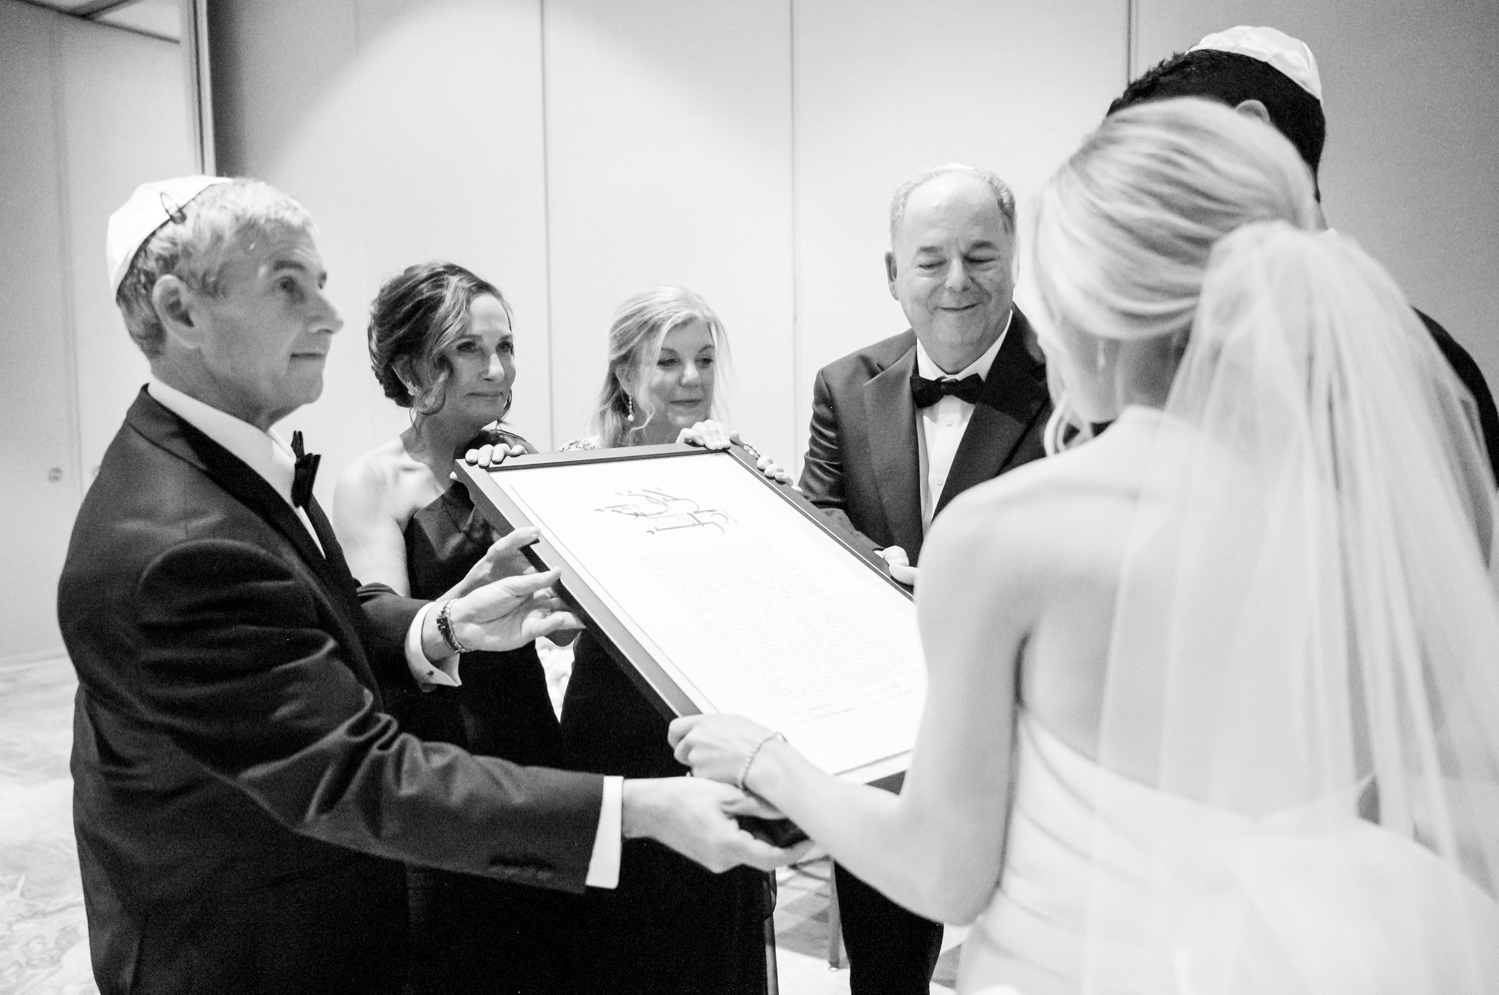 The bride and groom's family presents the signed ketubah to them